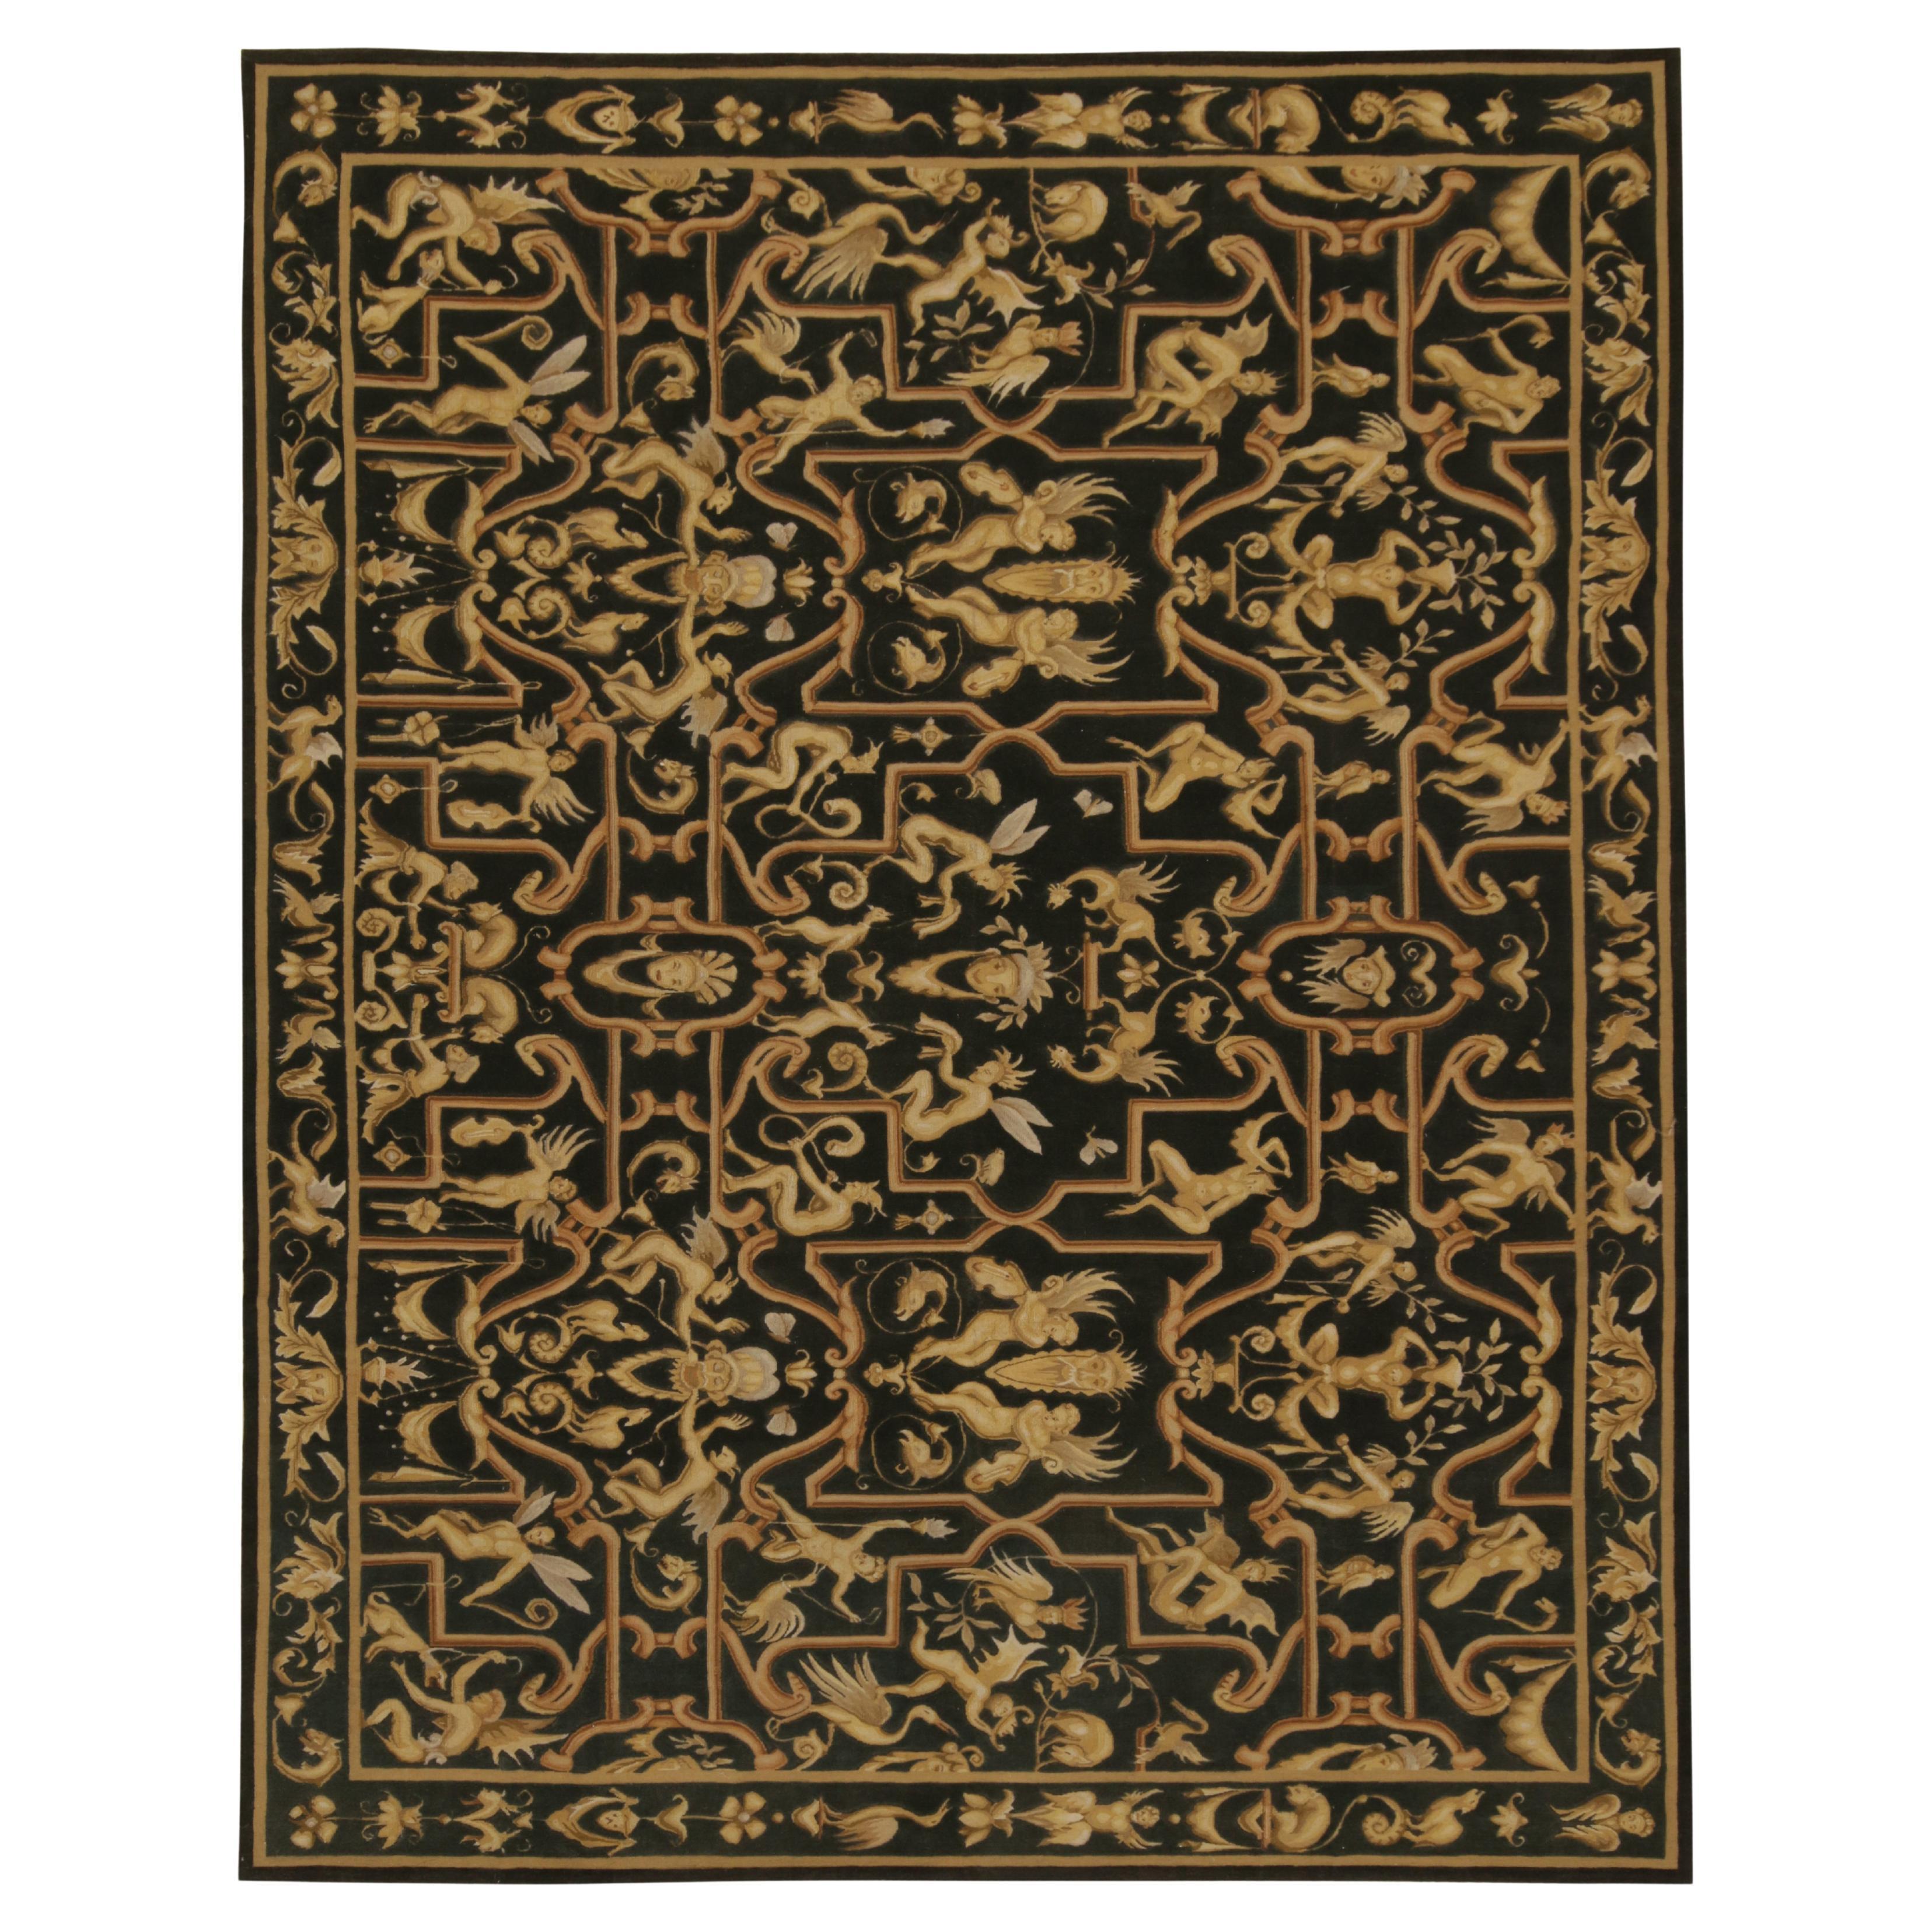 Rug & Kilim's European Tudor style Flat Weave in Black with Gold Pictorial (anglais seulement)